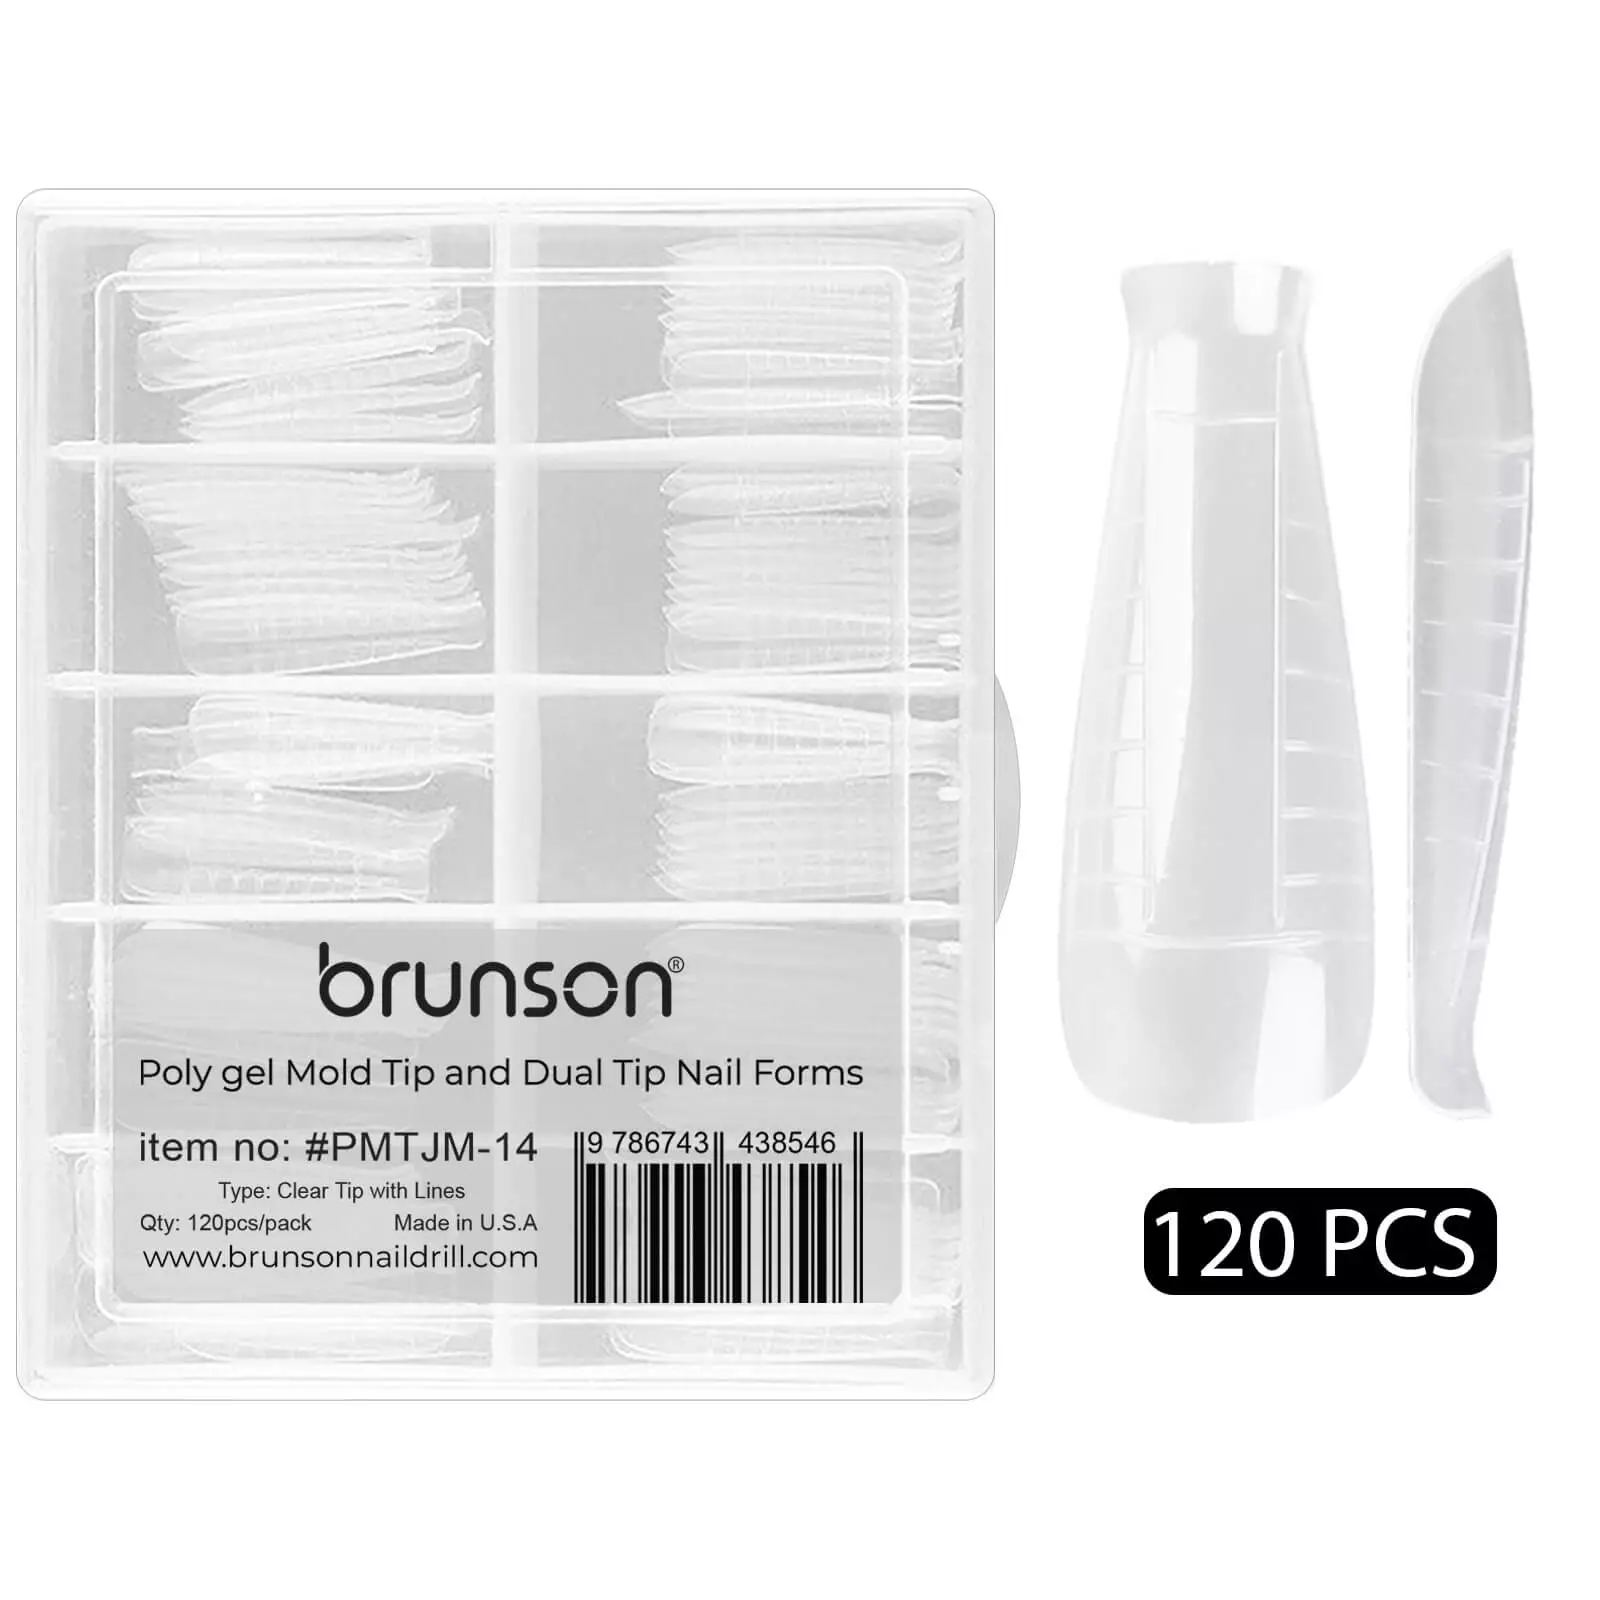 Poly-Gel-Mold-Tip-and-Dual-Tip-Nail-Forms-PMTJM-14-Brunson-1